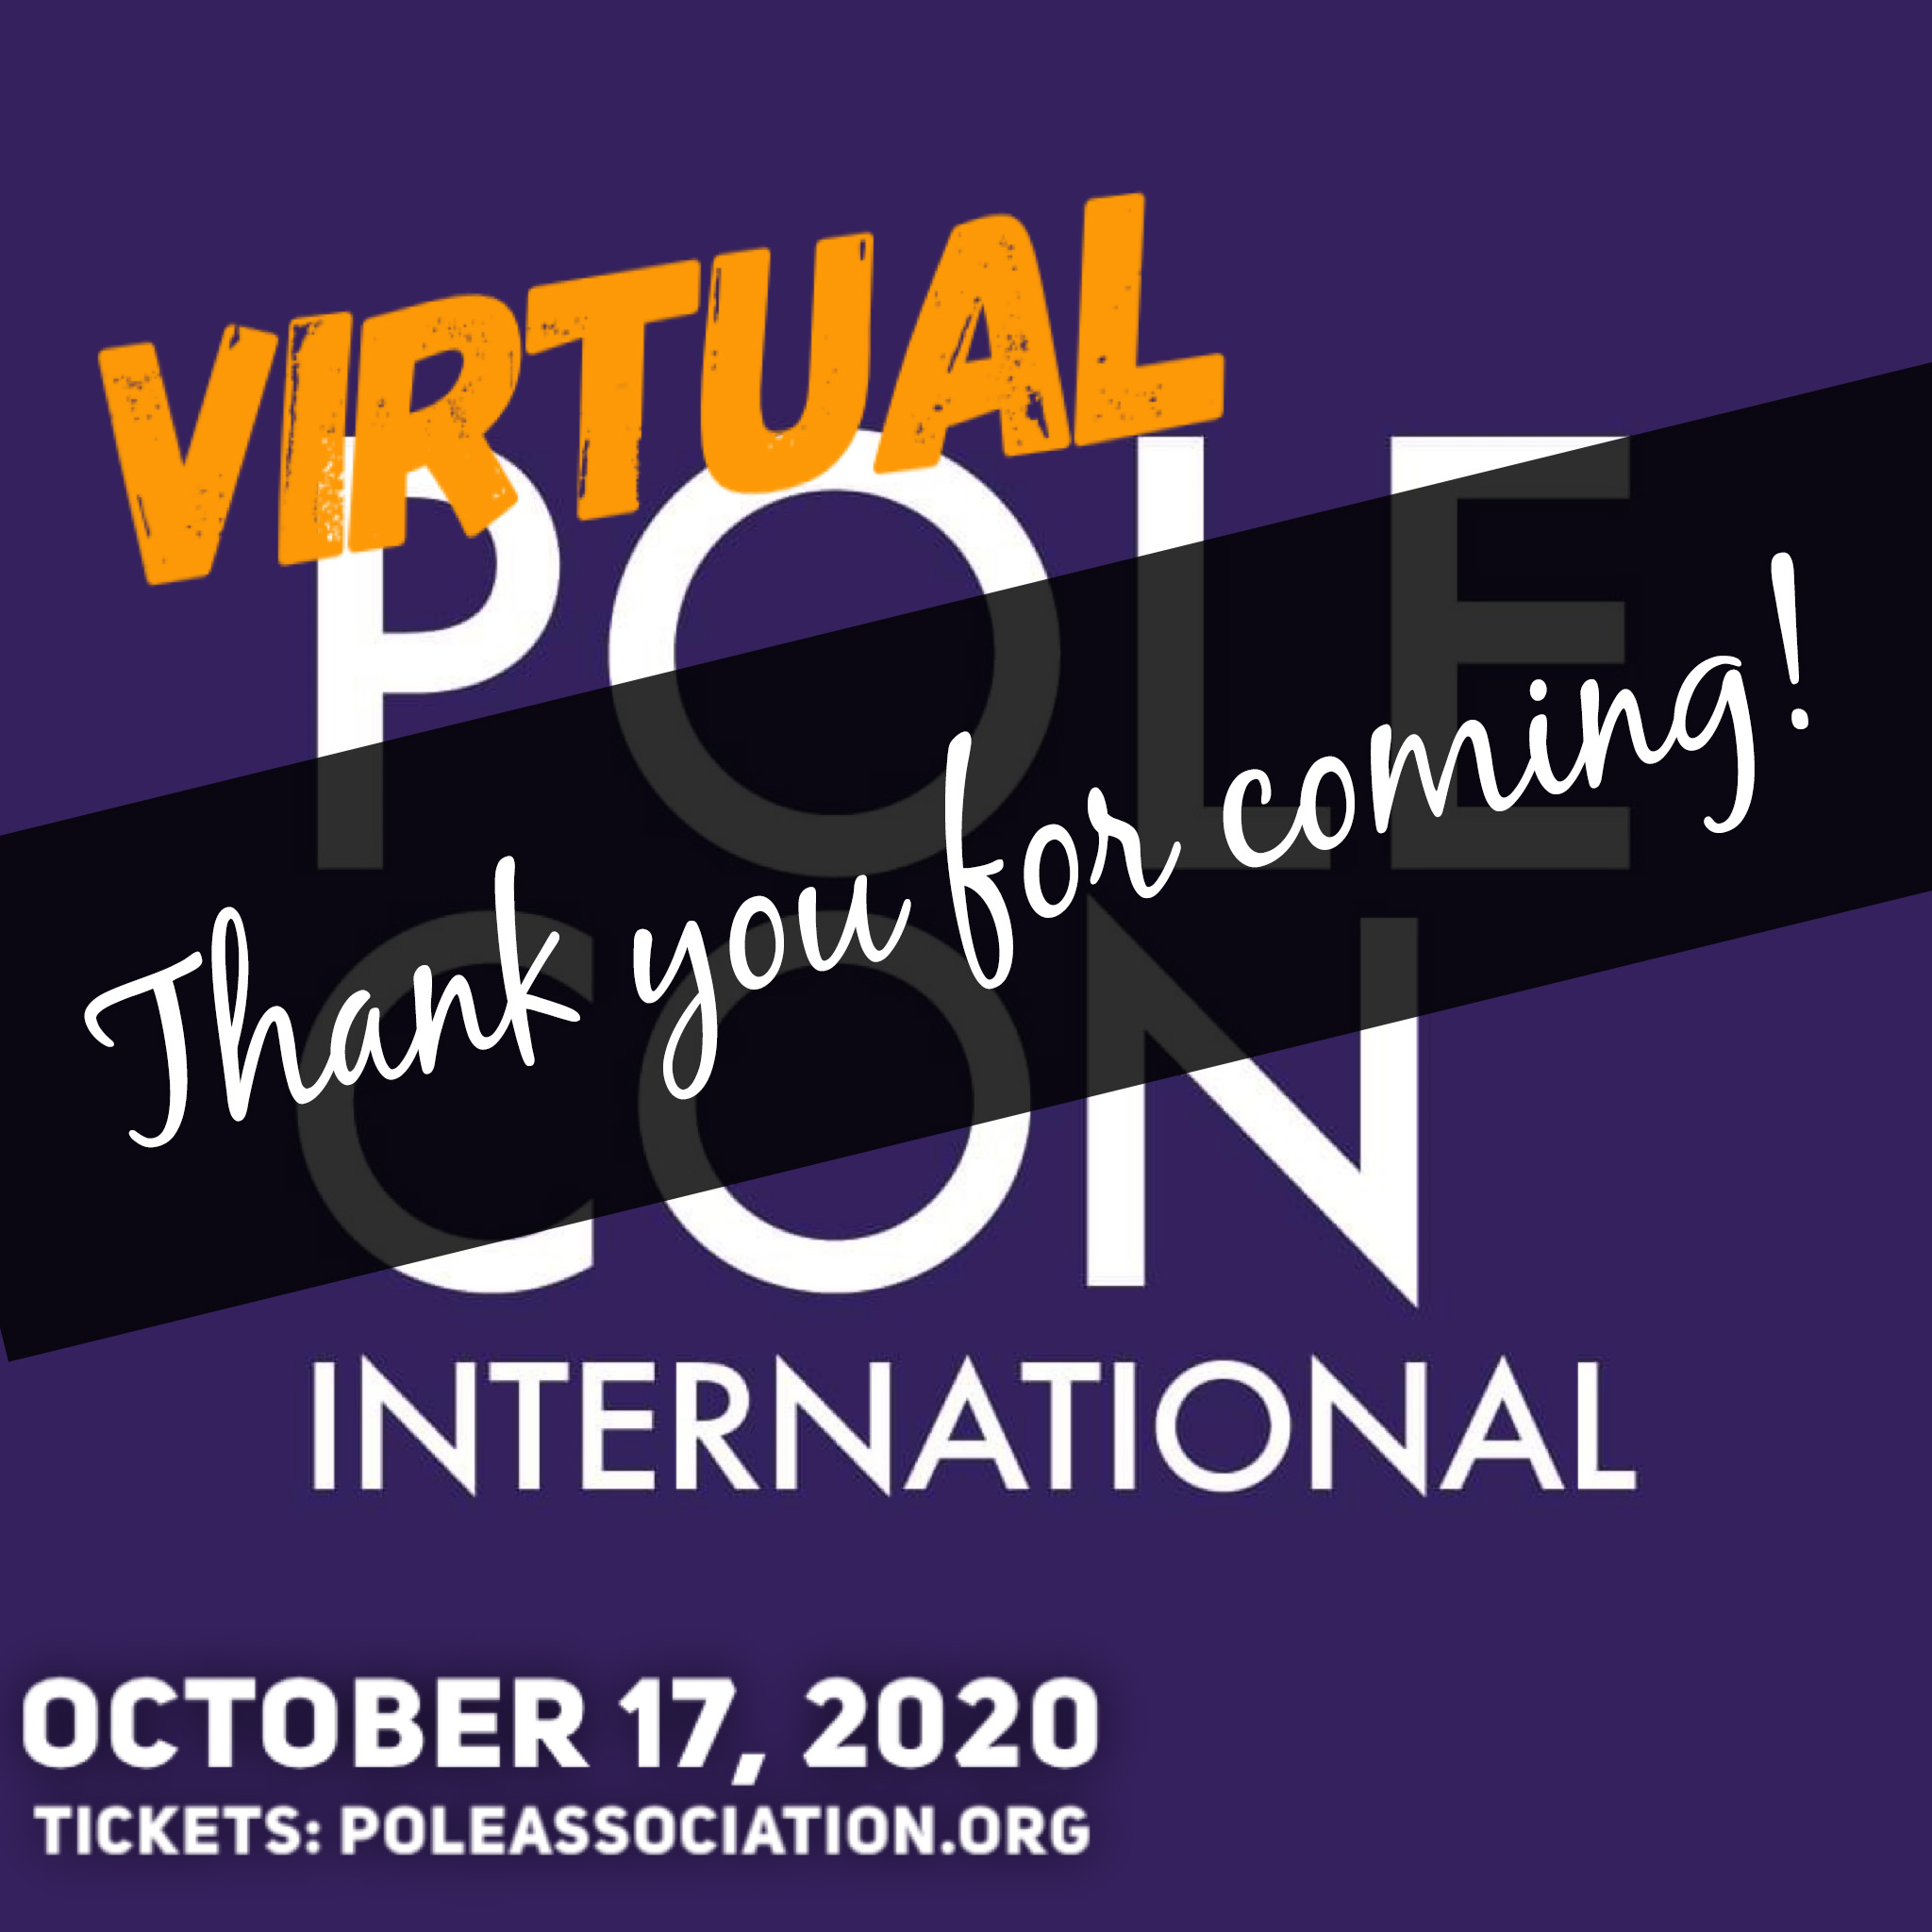 PoleCon International logo with text " Virtual thank you for coming!" October 2020